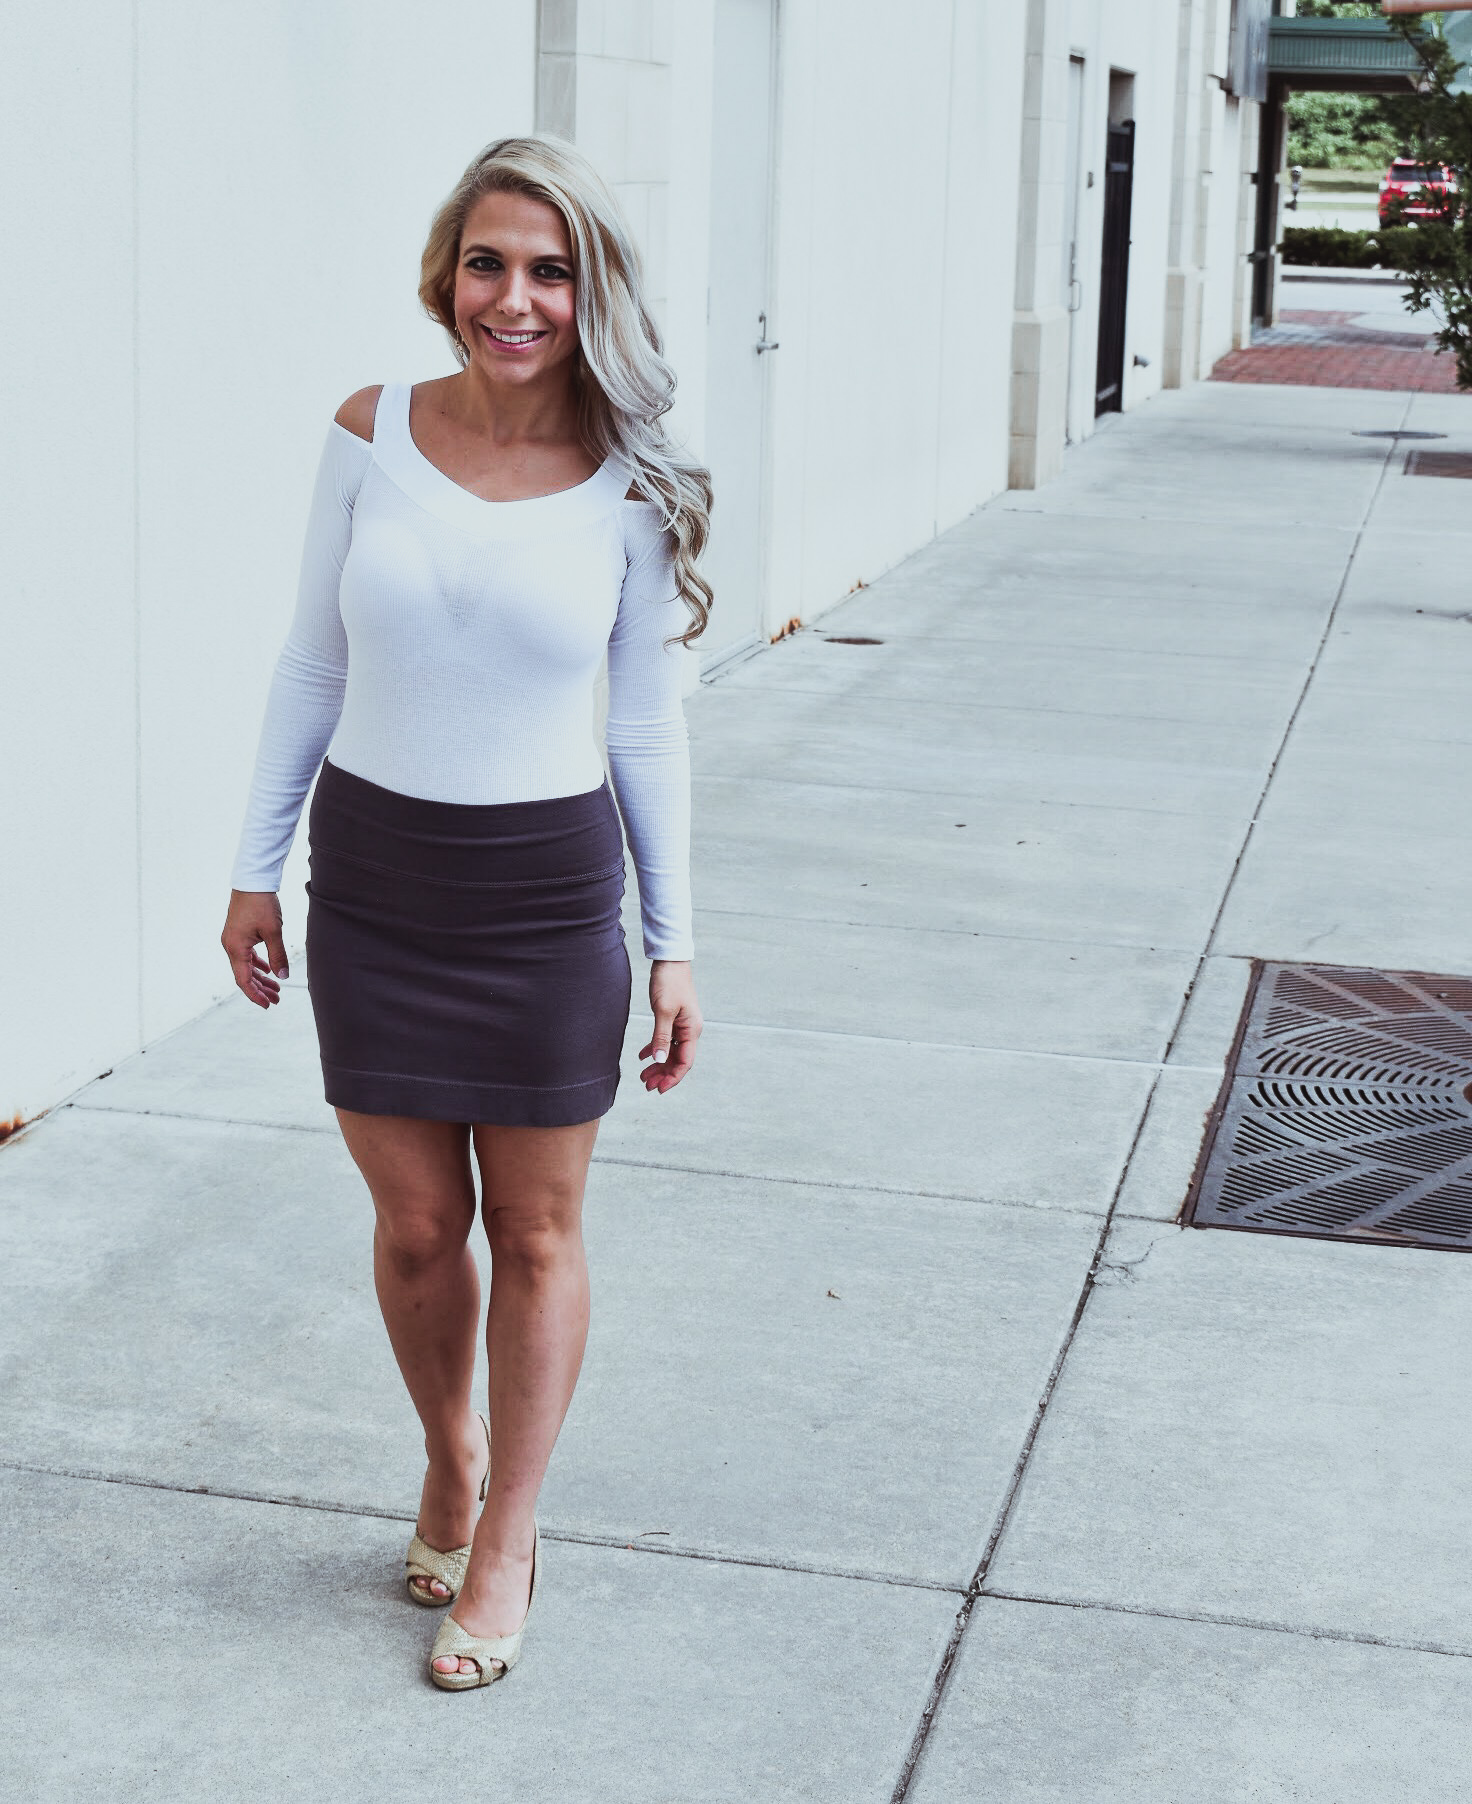 How to Wear a Bodysuit - White Bodysuit and Mini Skirt Style: Fashion  blogger COVET